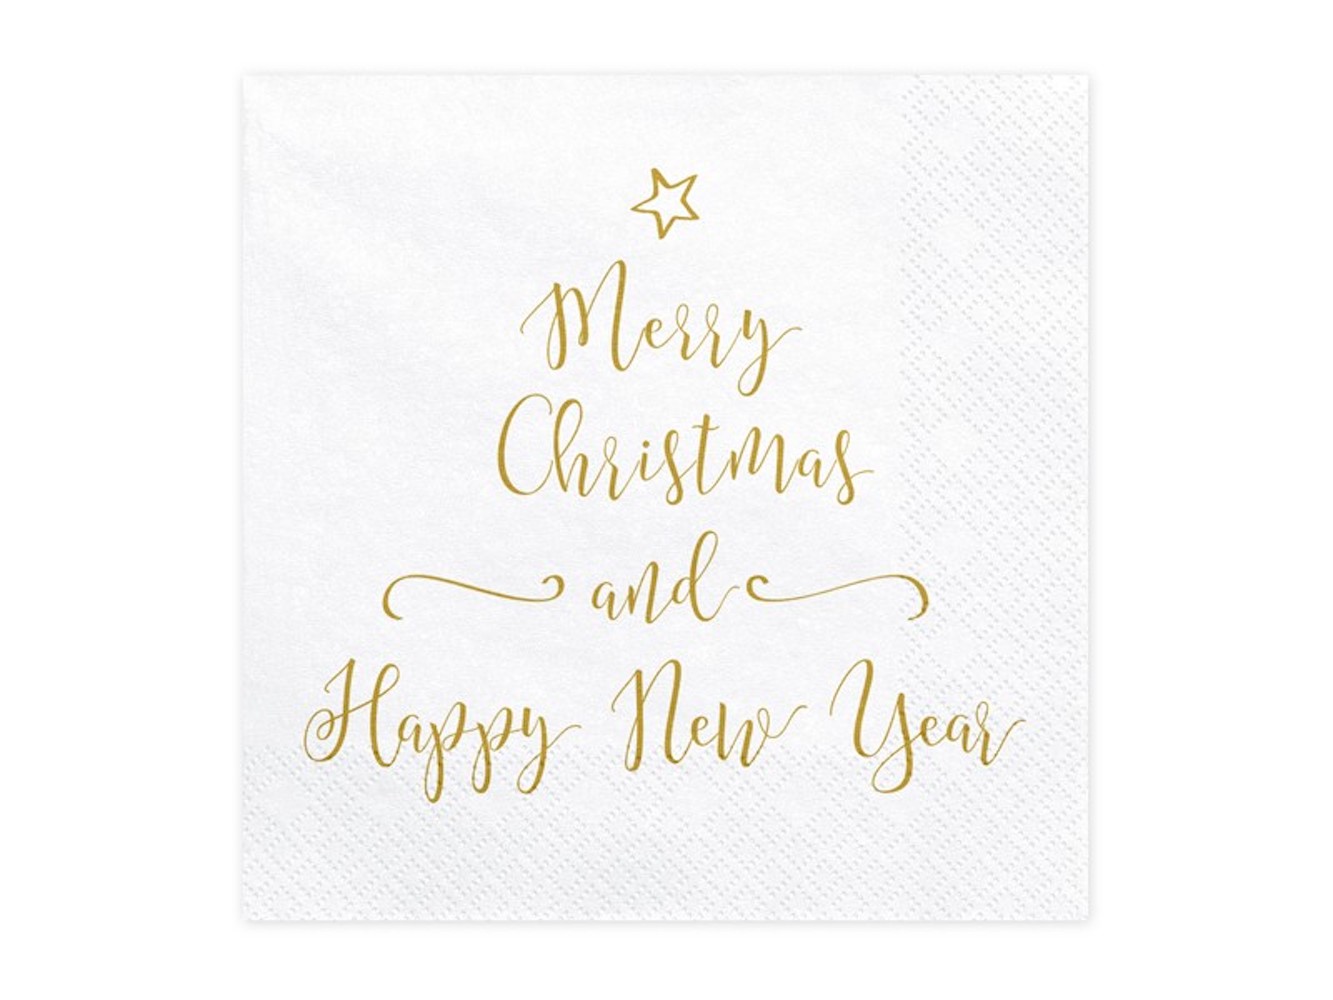 20 Servietten - Merry Christmas and Happy New Year weiß/gold - 33x33cm - 3-lagig